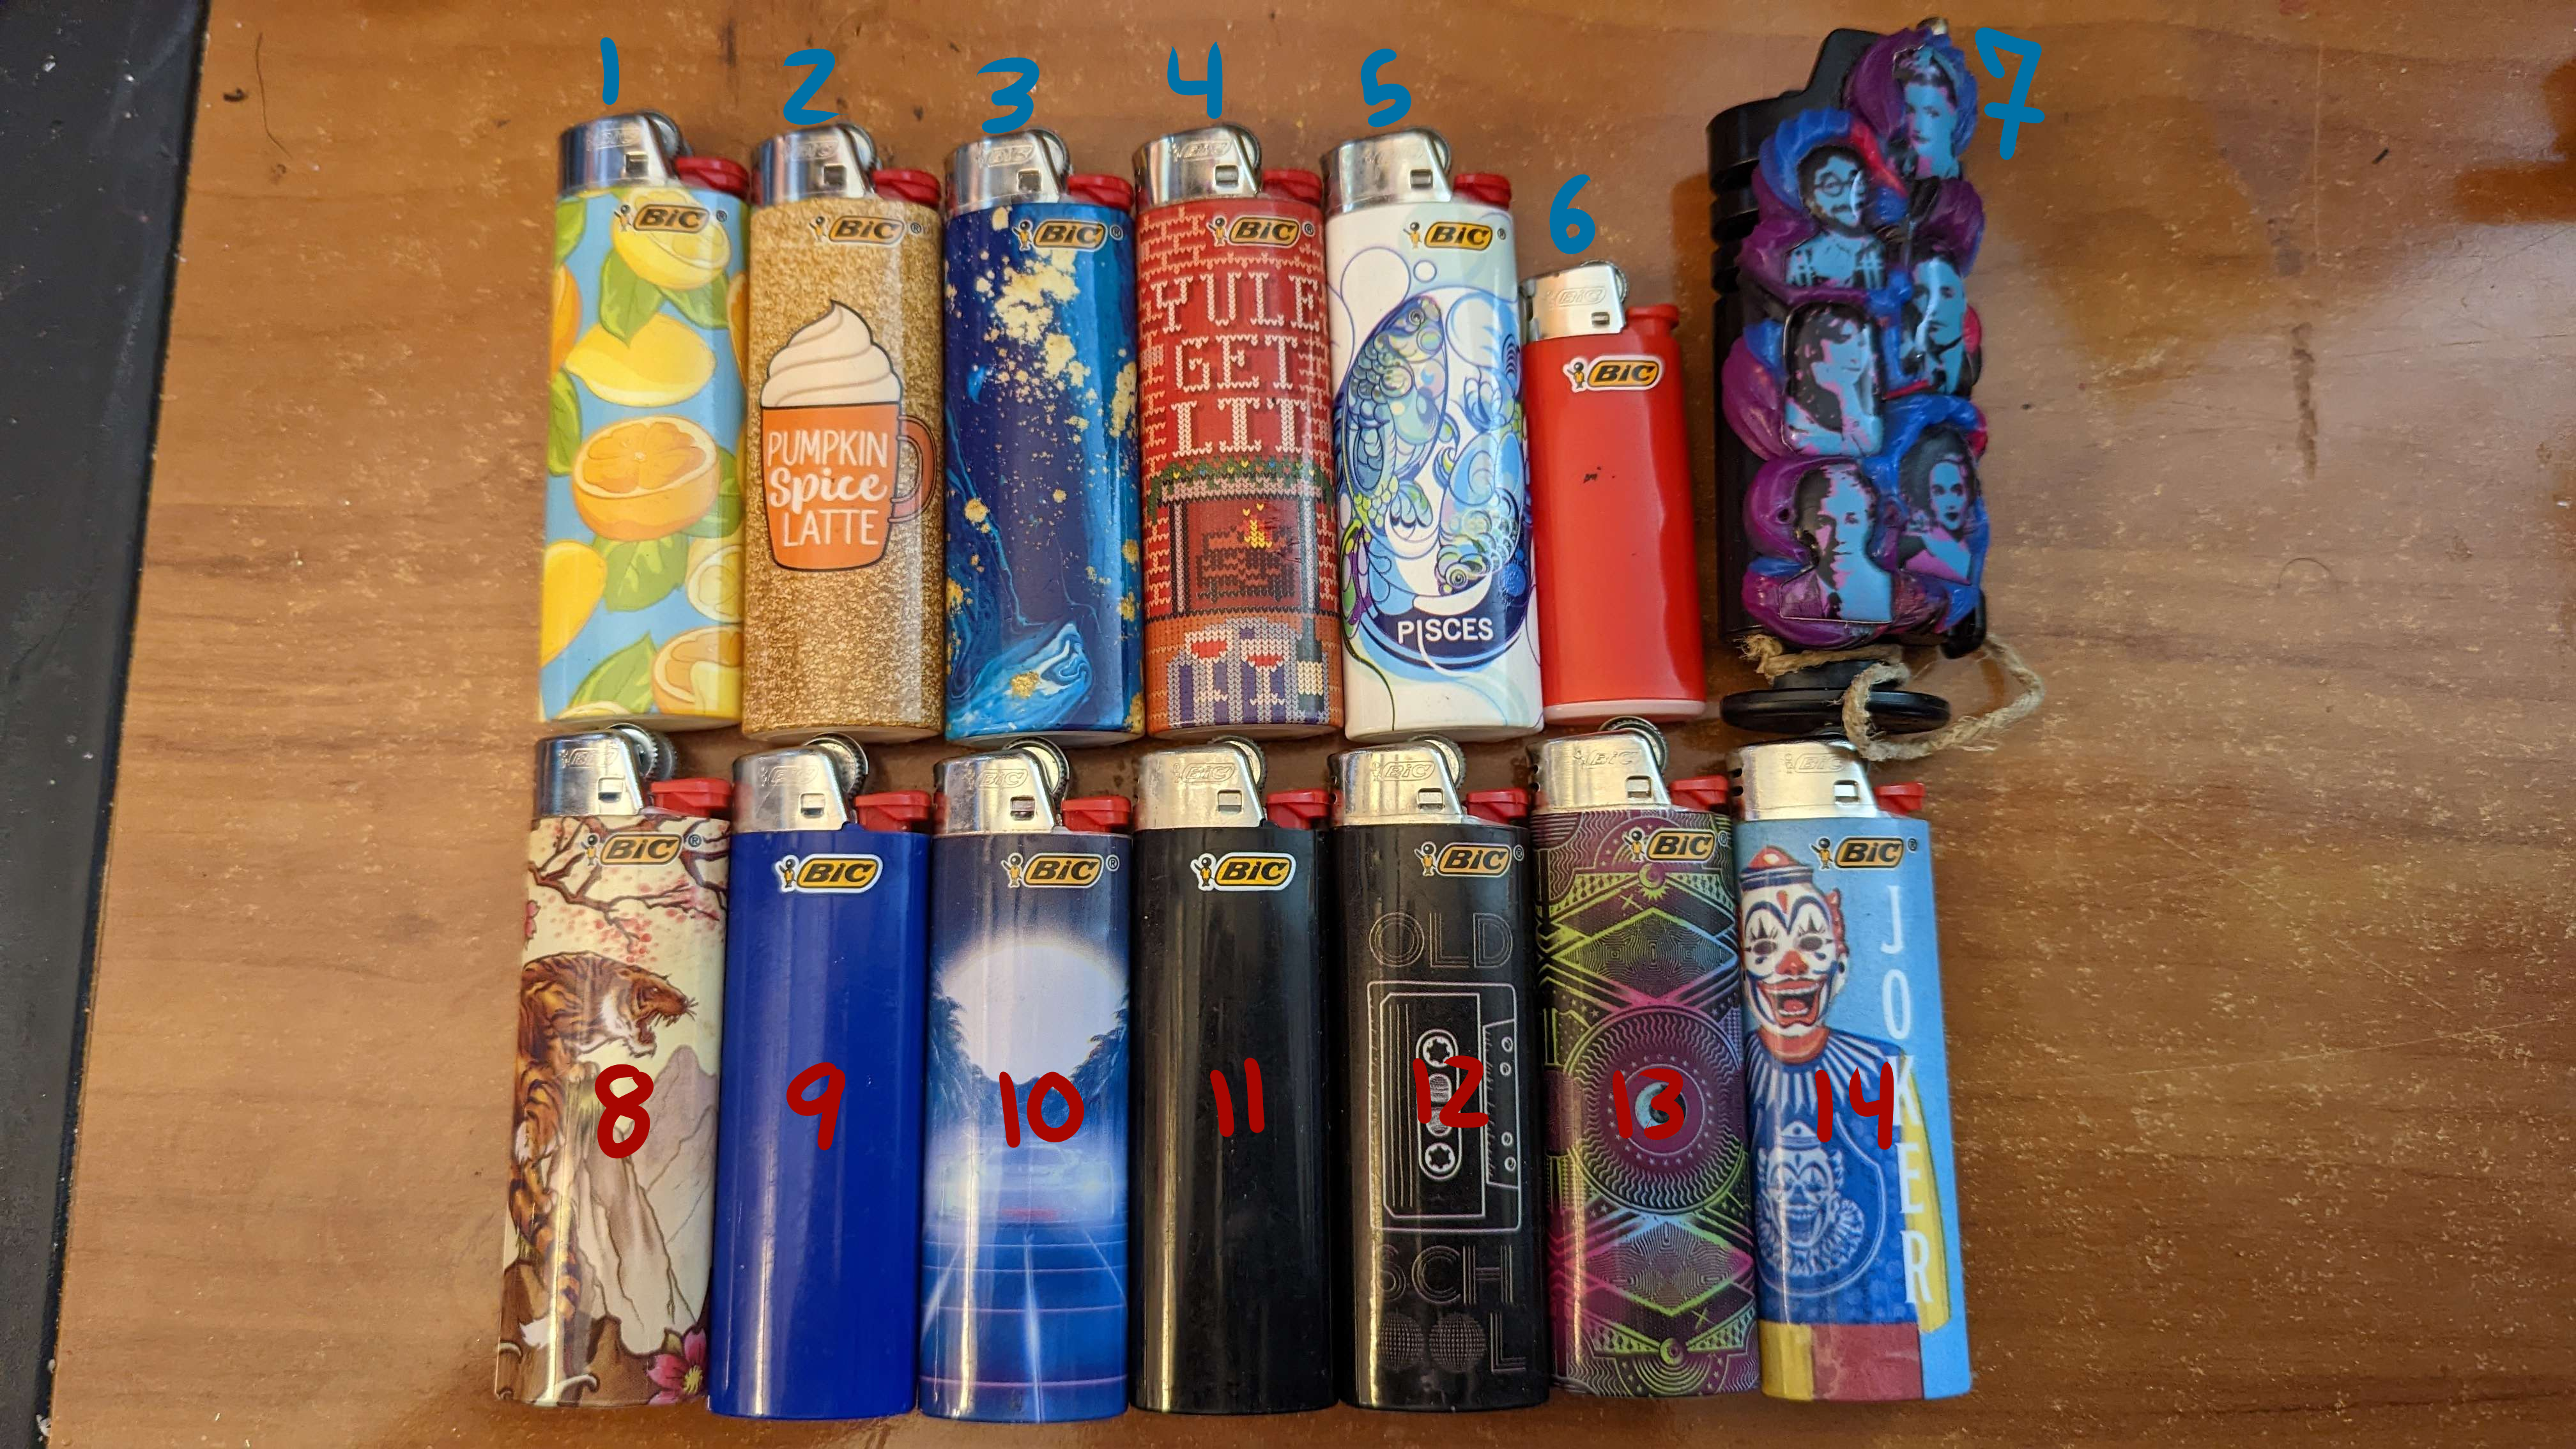 All but two of my bic lighters